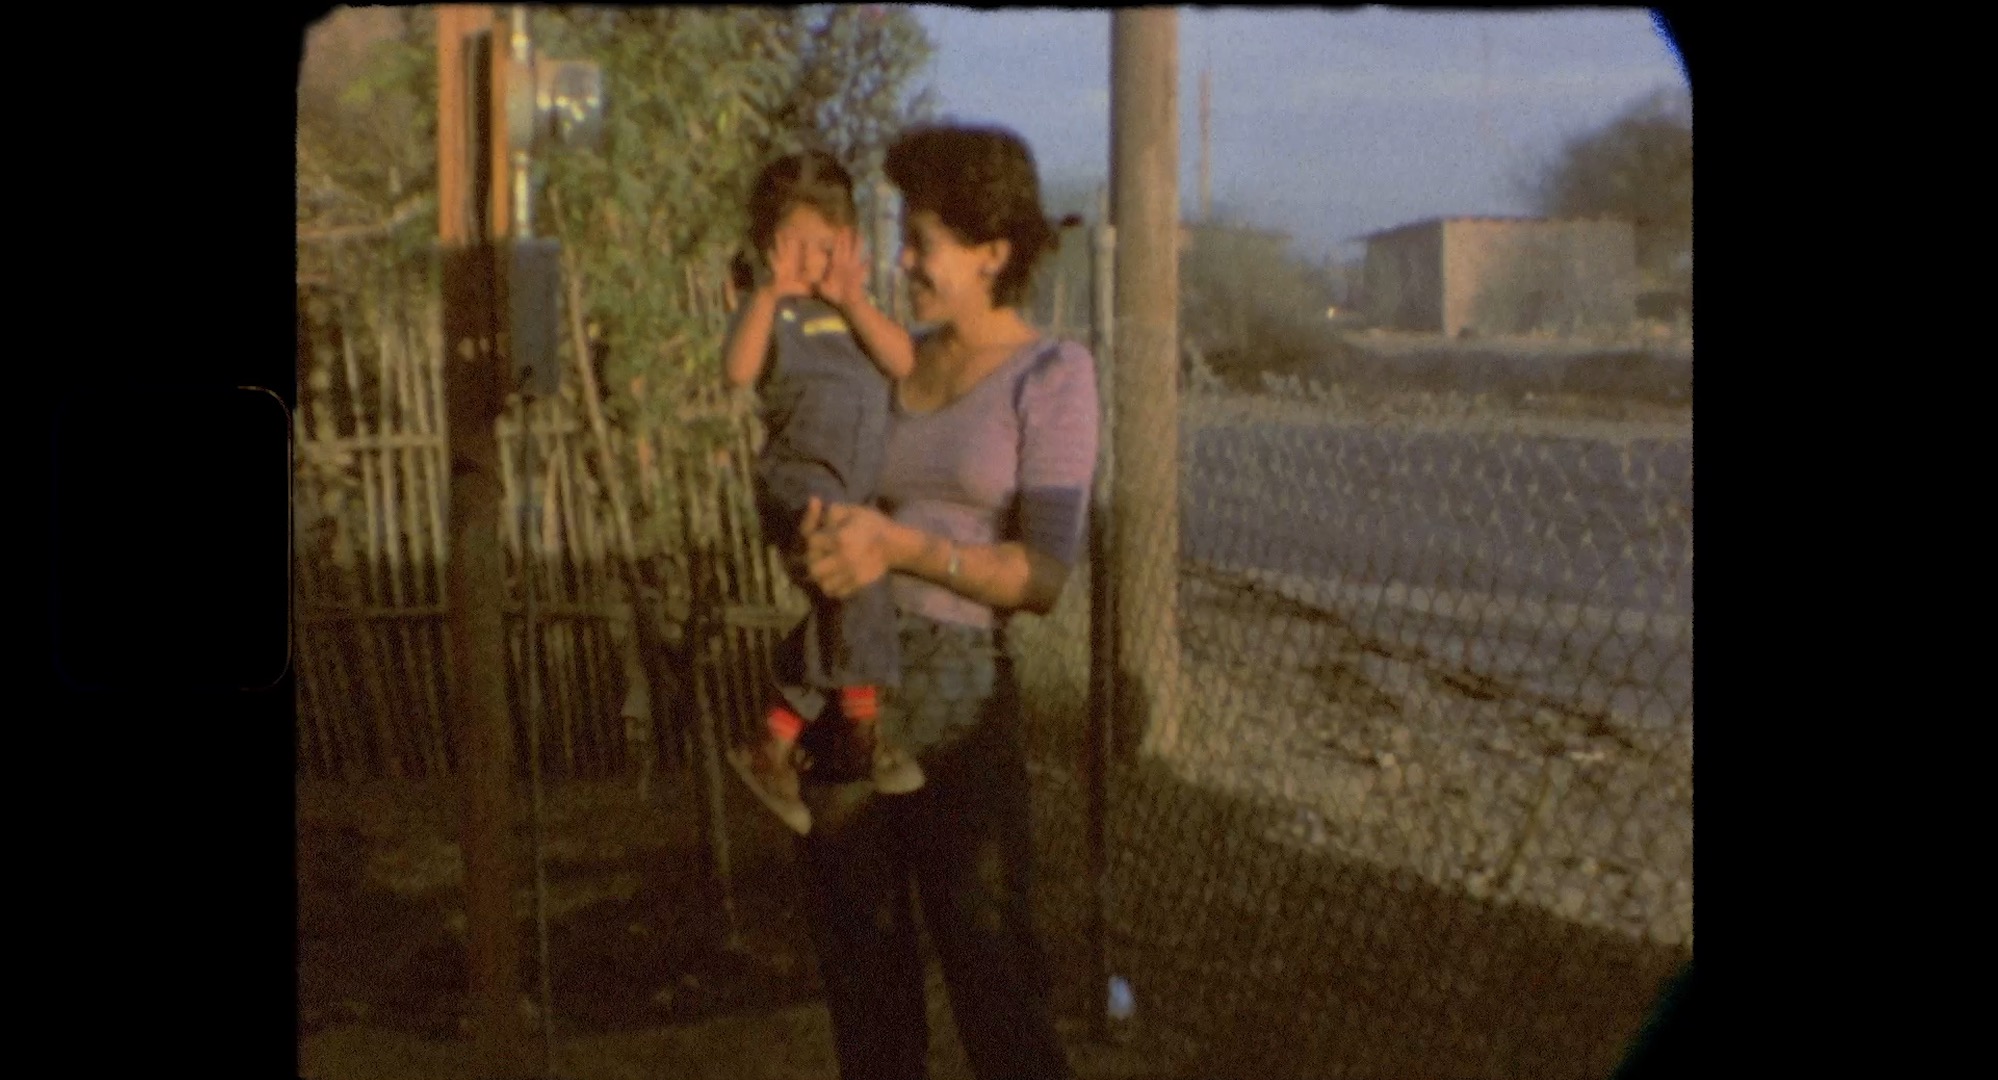 A old film still with a woman holding a child. The child hides her face in her hands. They are standing on a sidewalk and the sky is blue in the background.